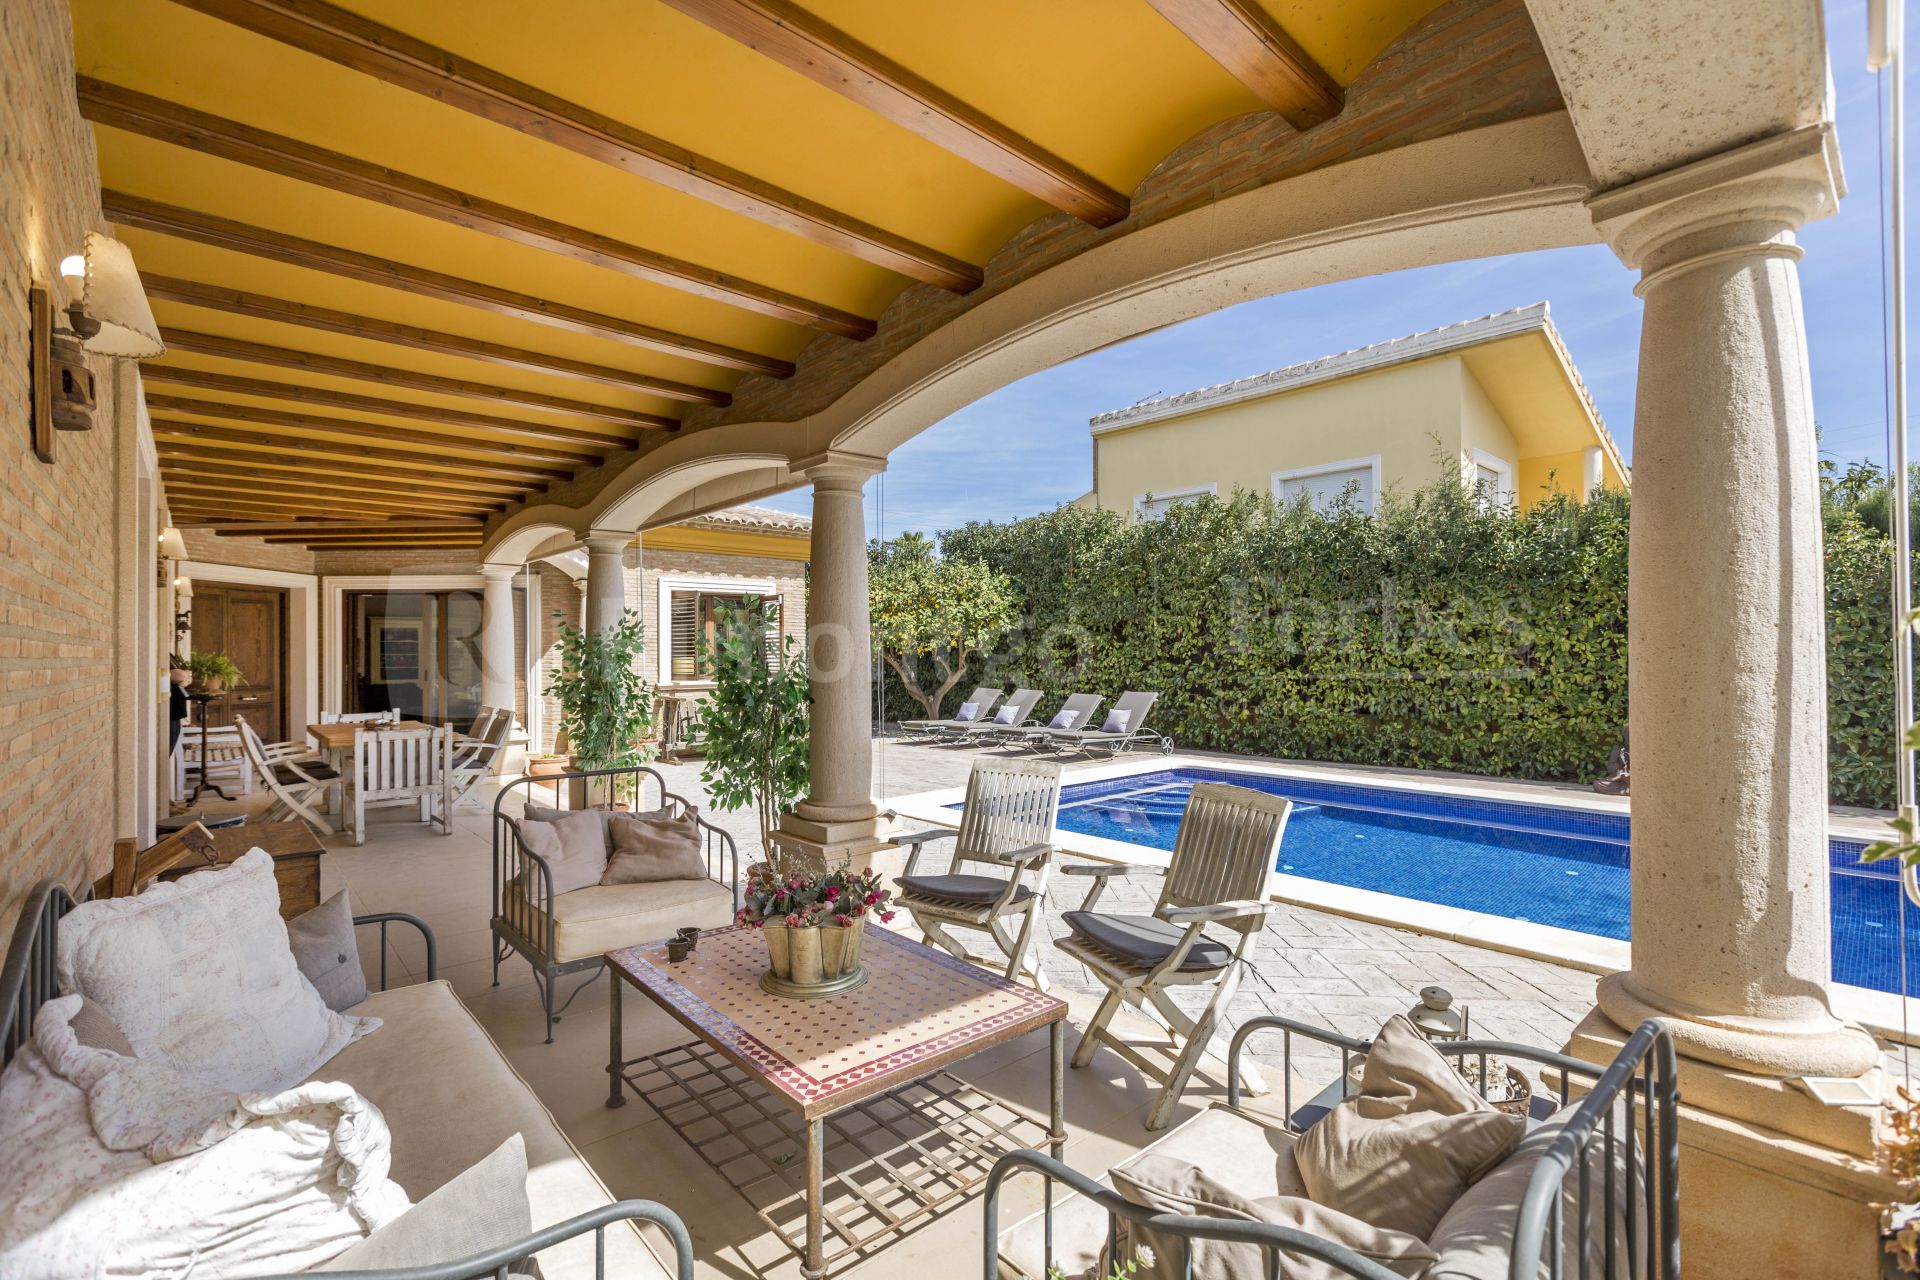 Elegant villa with terraces and swimming pool on a very private plot in Torre en Conill, Bétera.